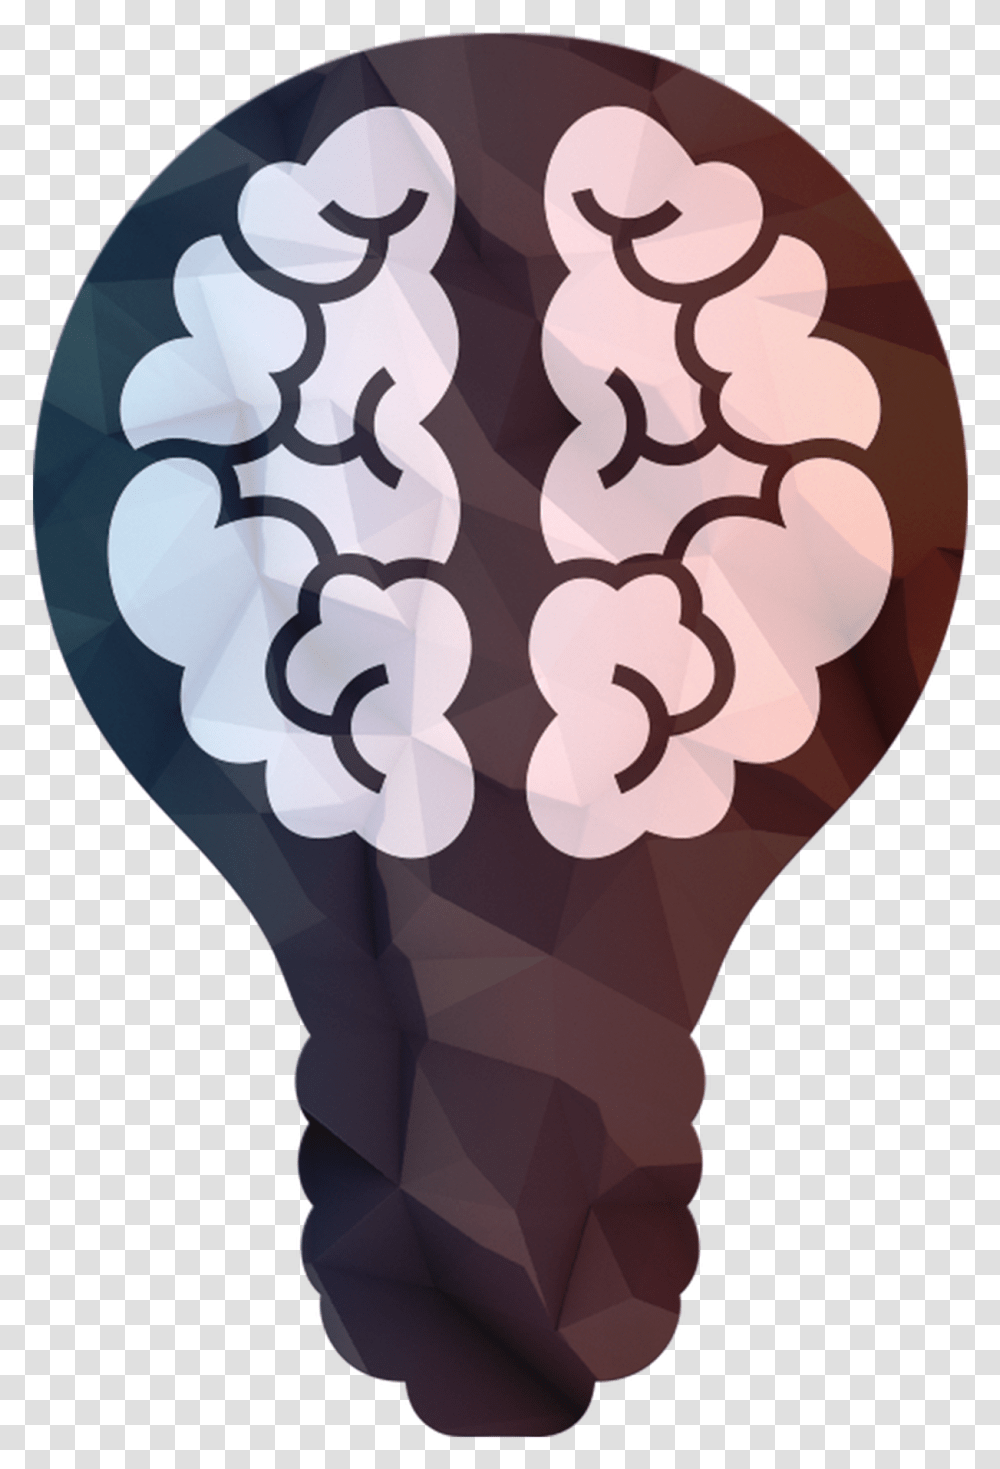 Job Working In A Home Improvement Store Or A Small Brain Icon, Rug, Head, Face Transparent Png